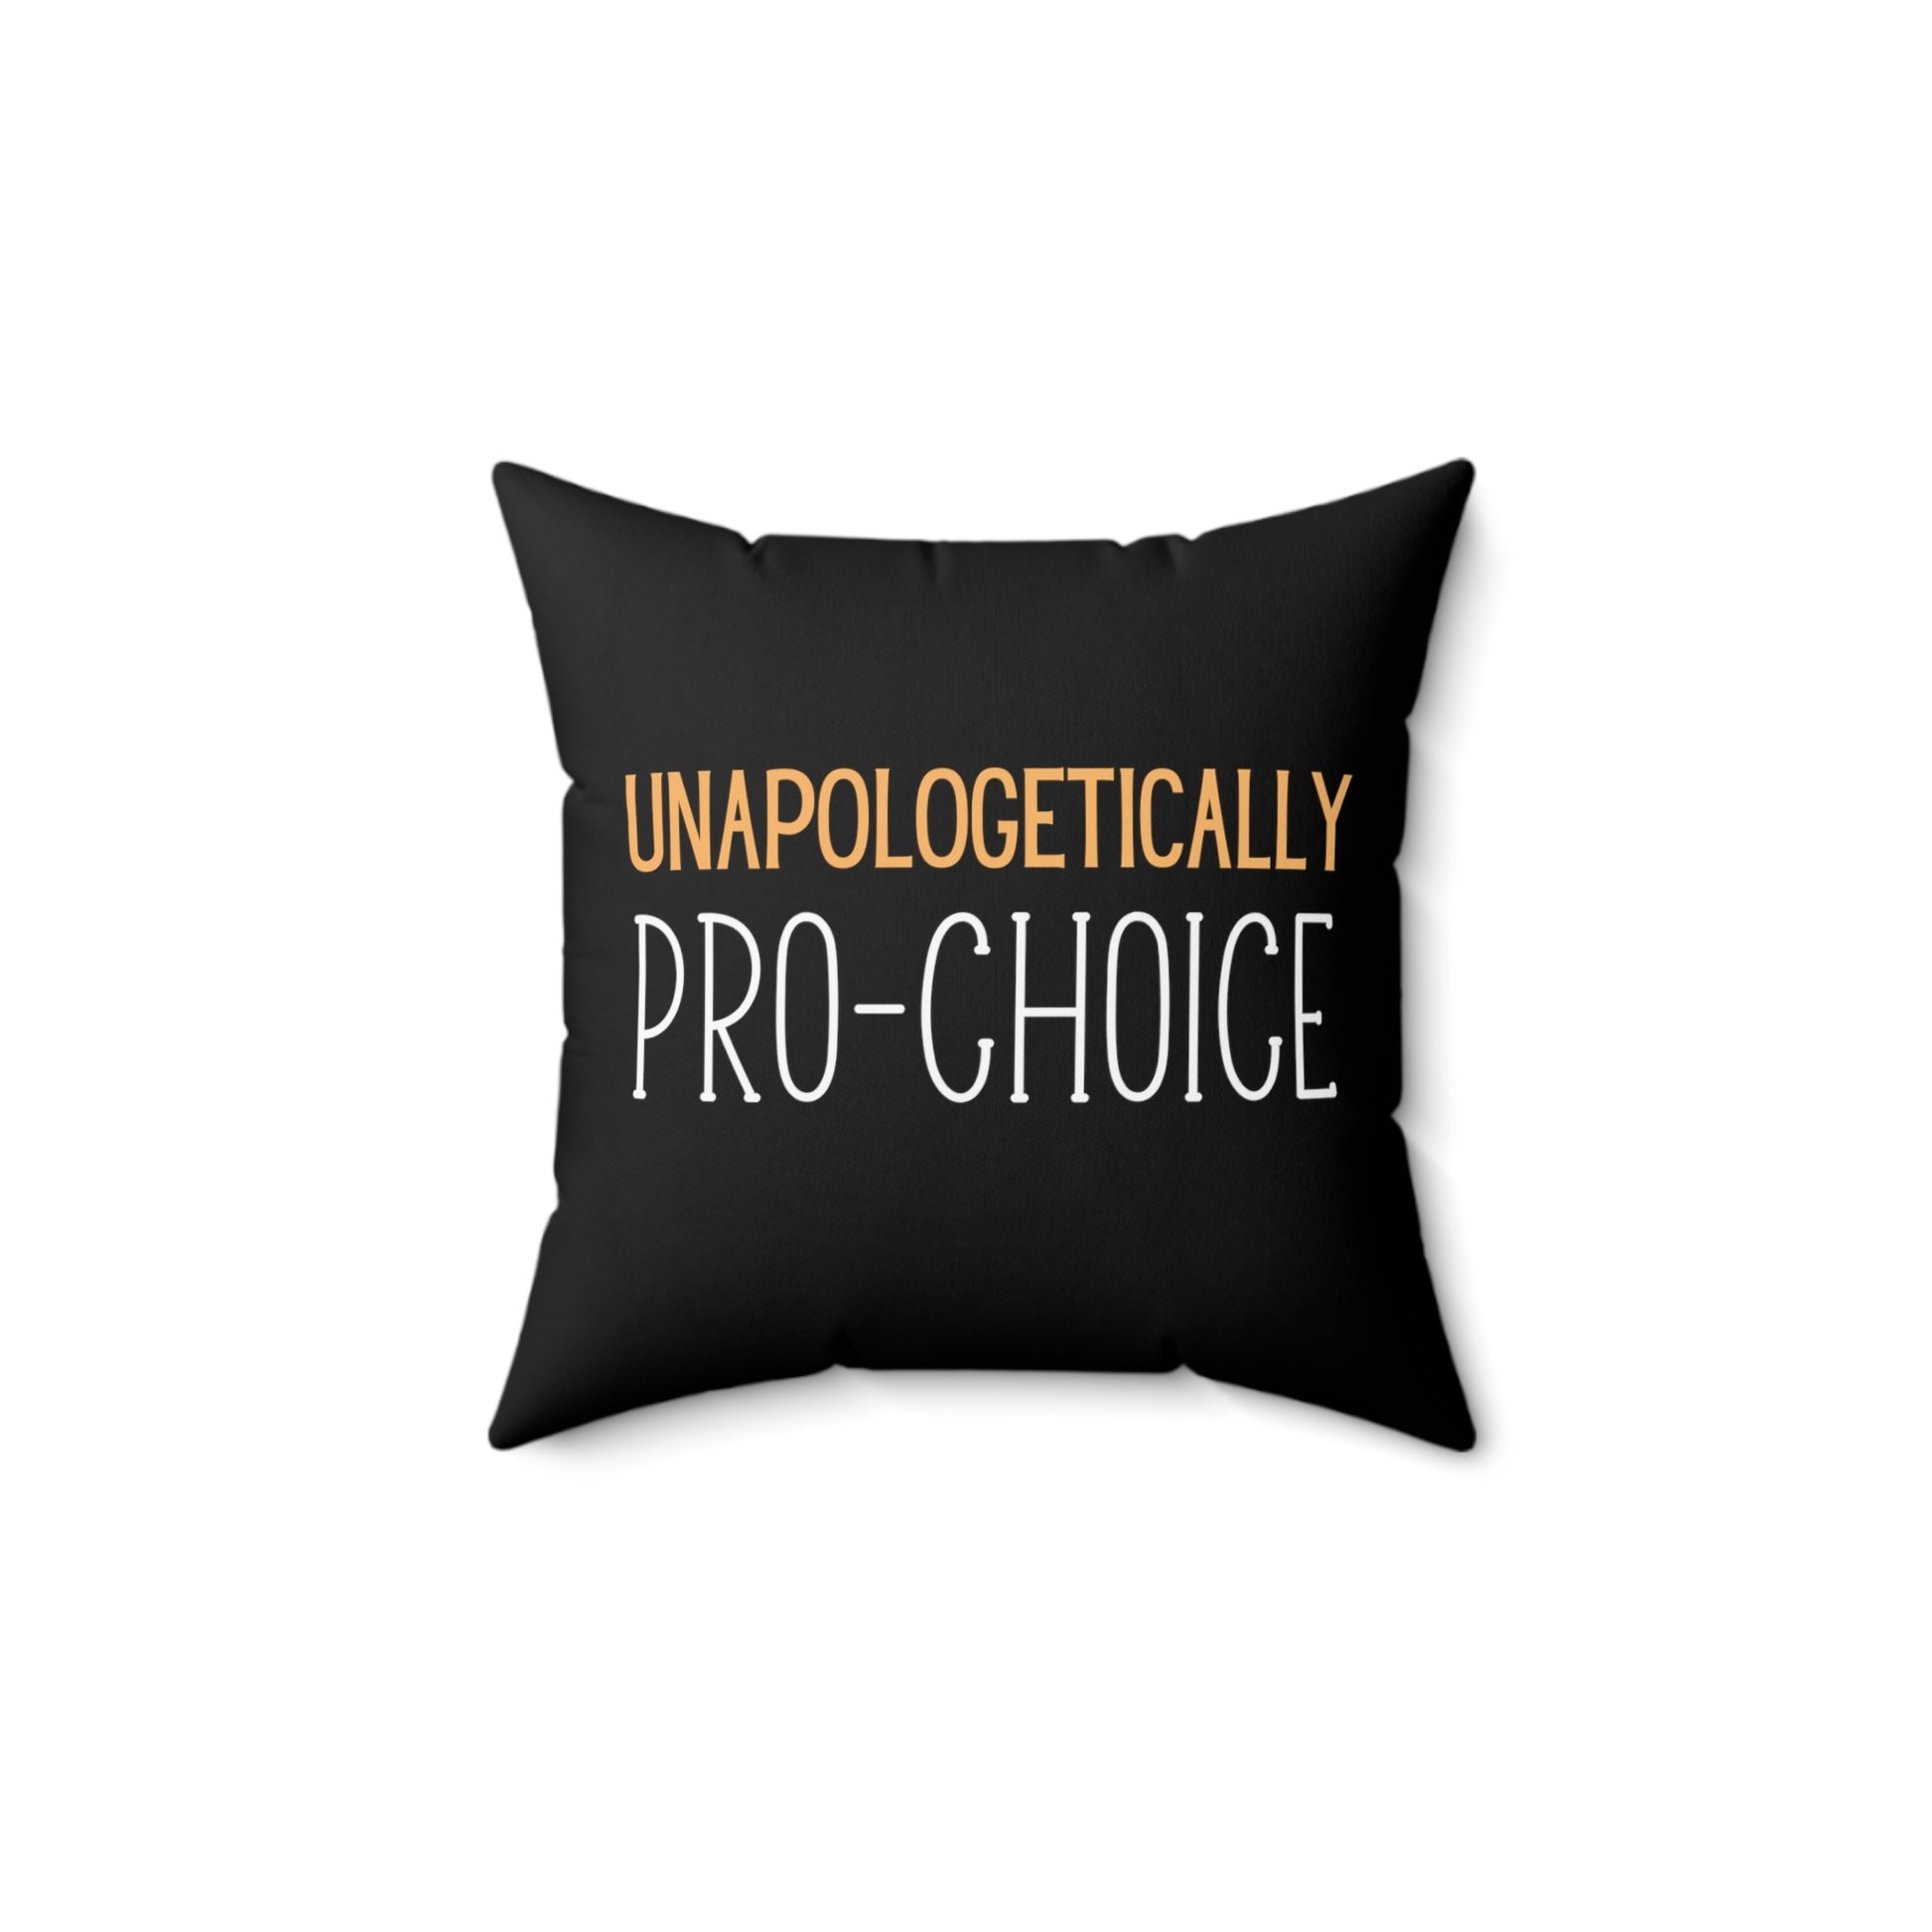 The double-sided print ensures that your pro-choice affirmation is always visible.